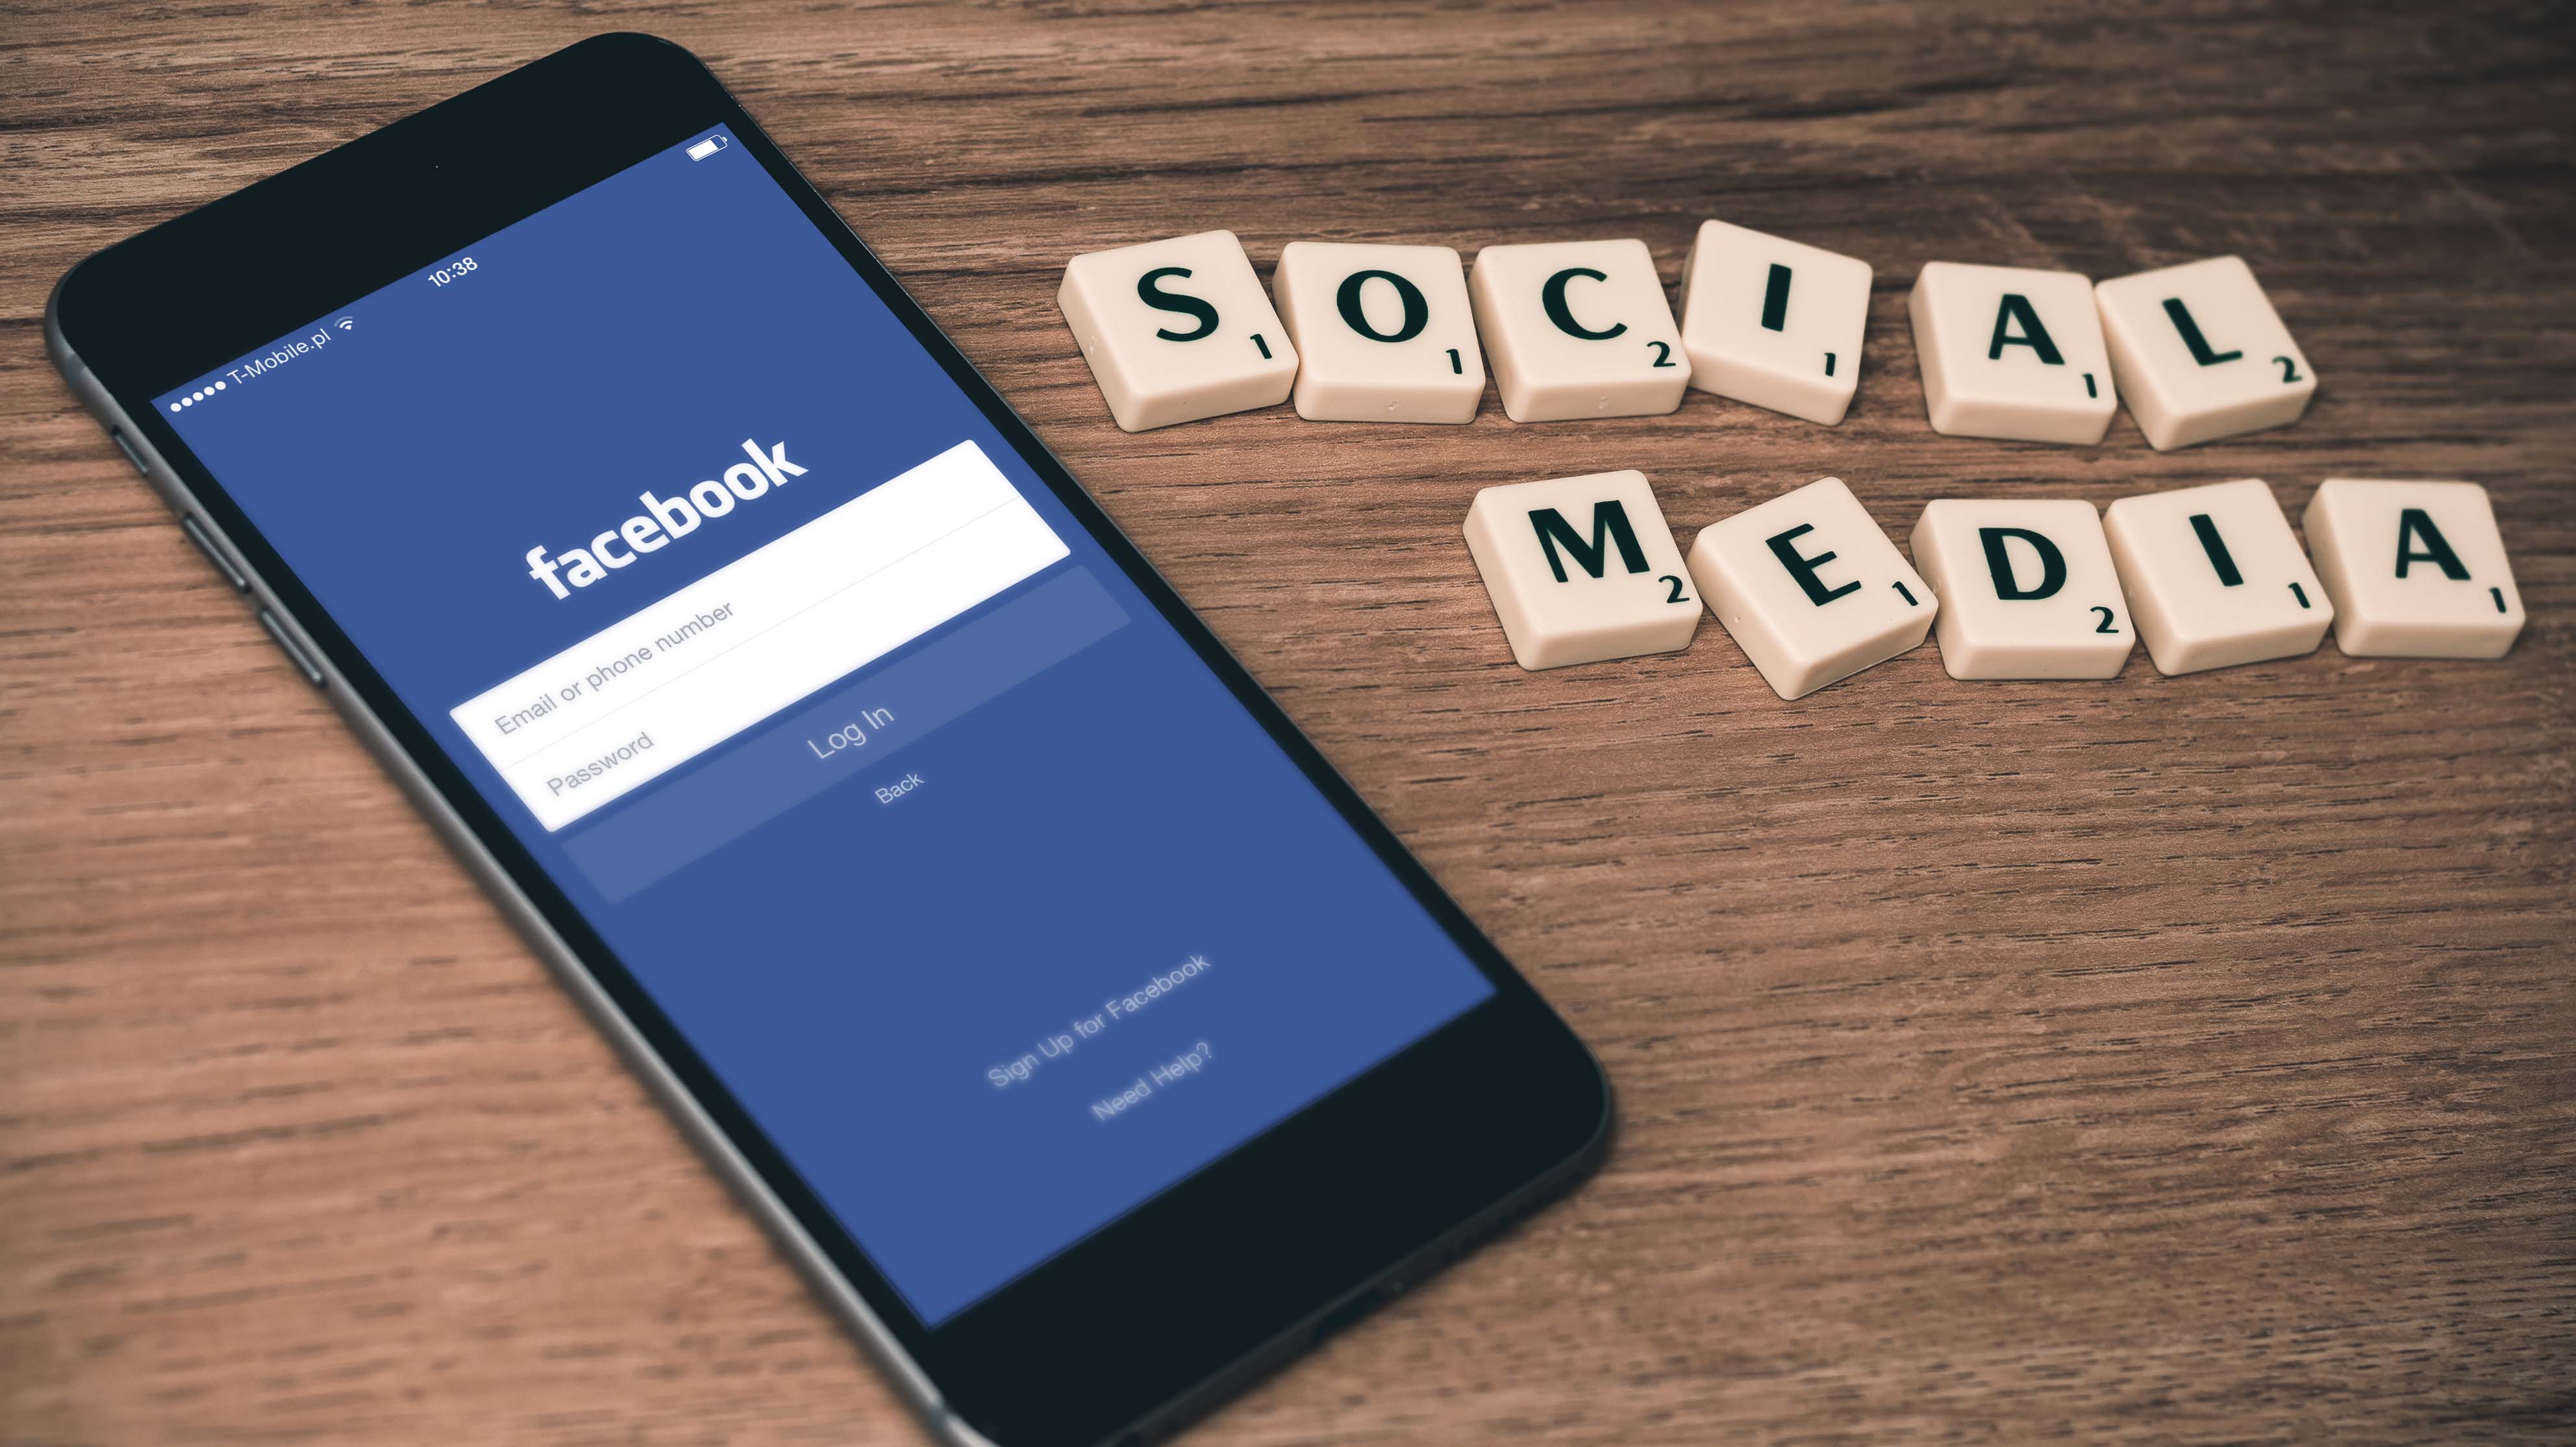 Why Your Business Needs a Social Media Strategy